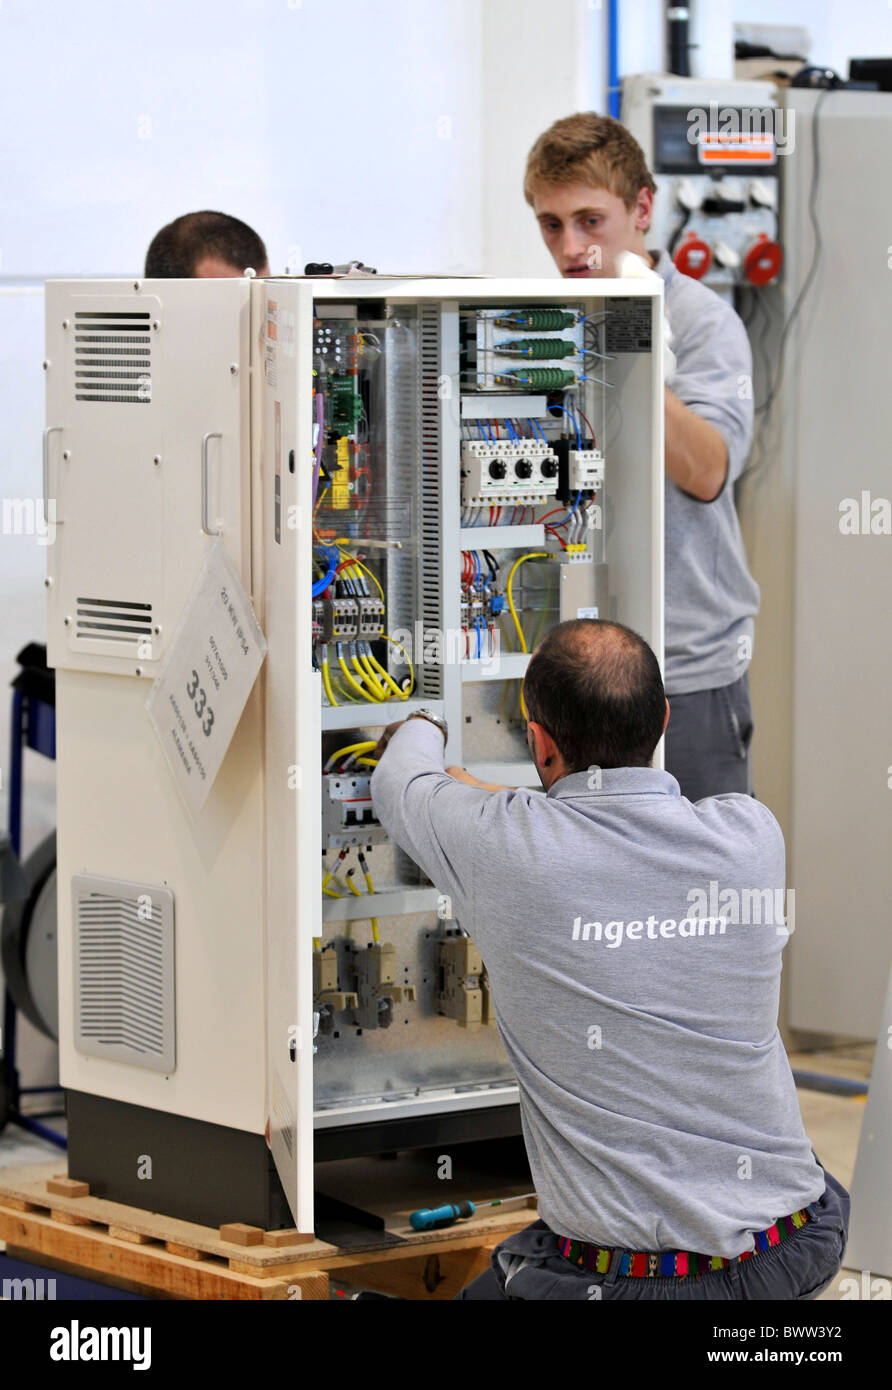 Ingerteam makers and providers of electrical inverters and control systems for the renewable energy sector, Sesma, Spain Stock Photo